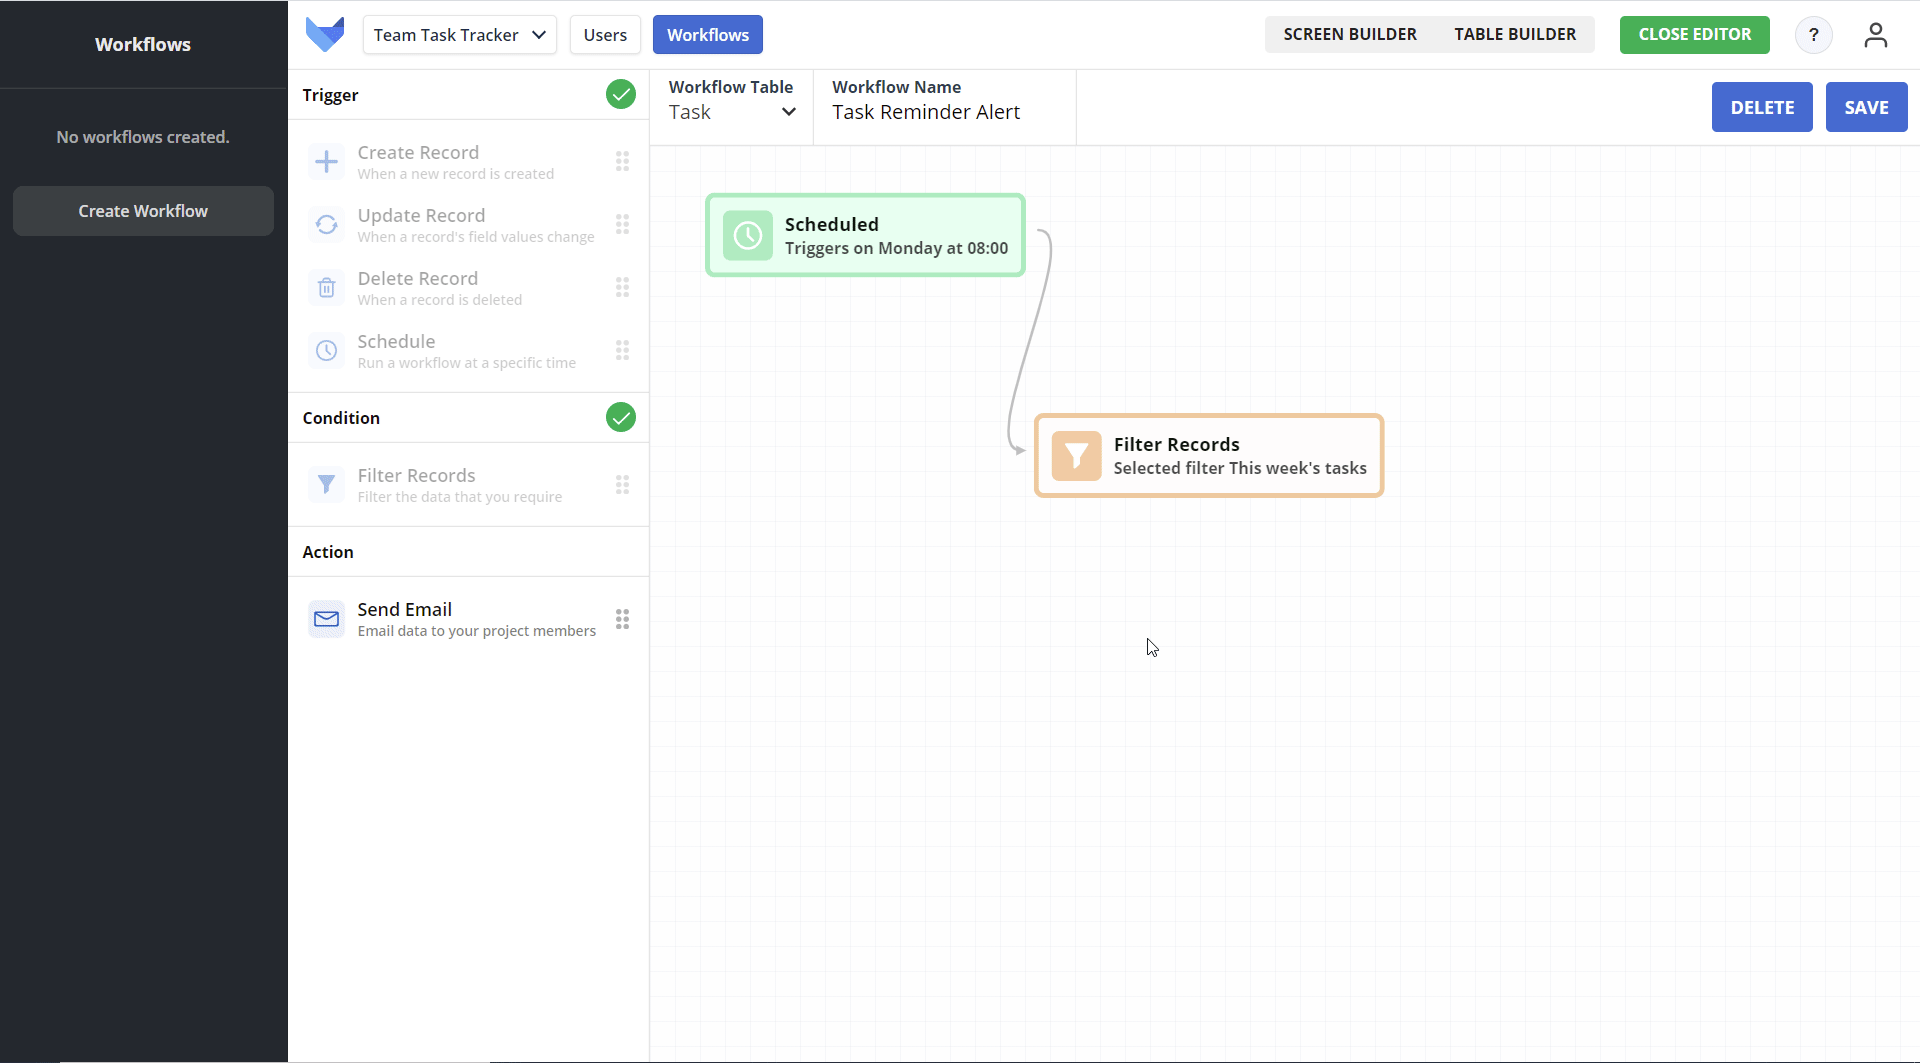 Add Workflow Action